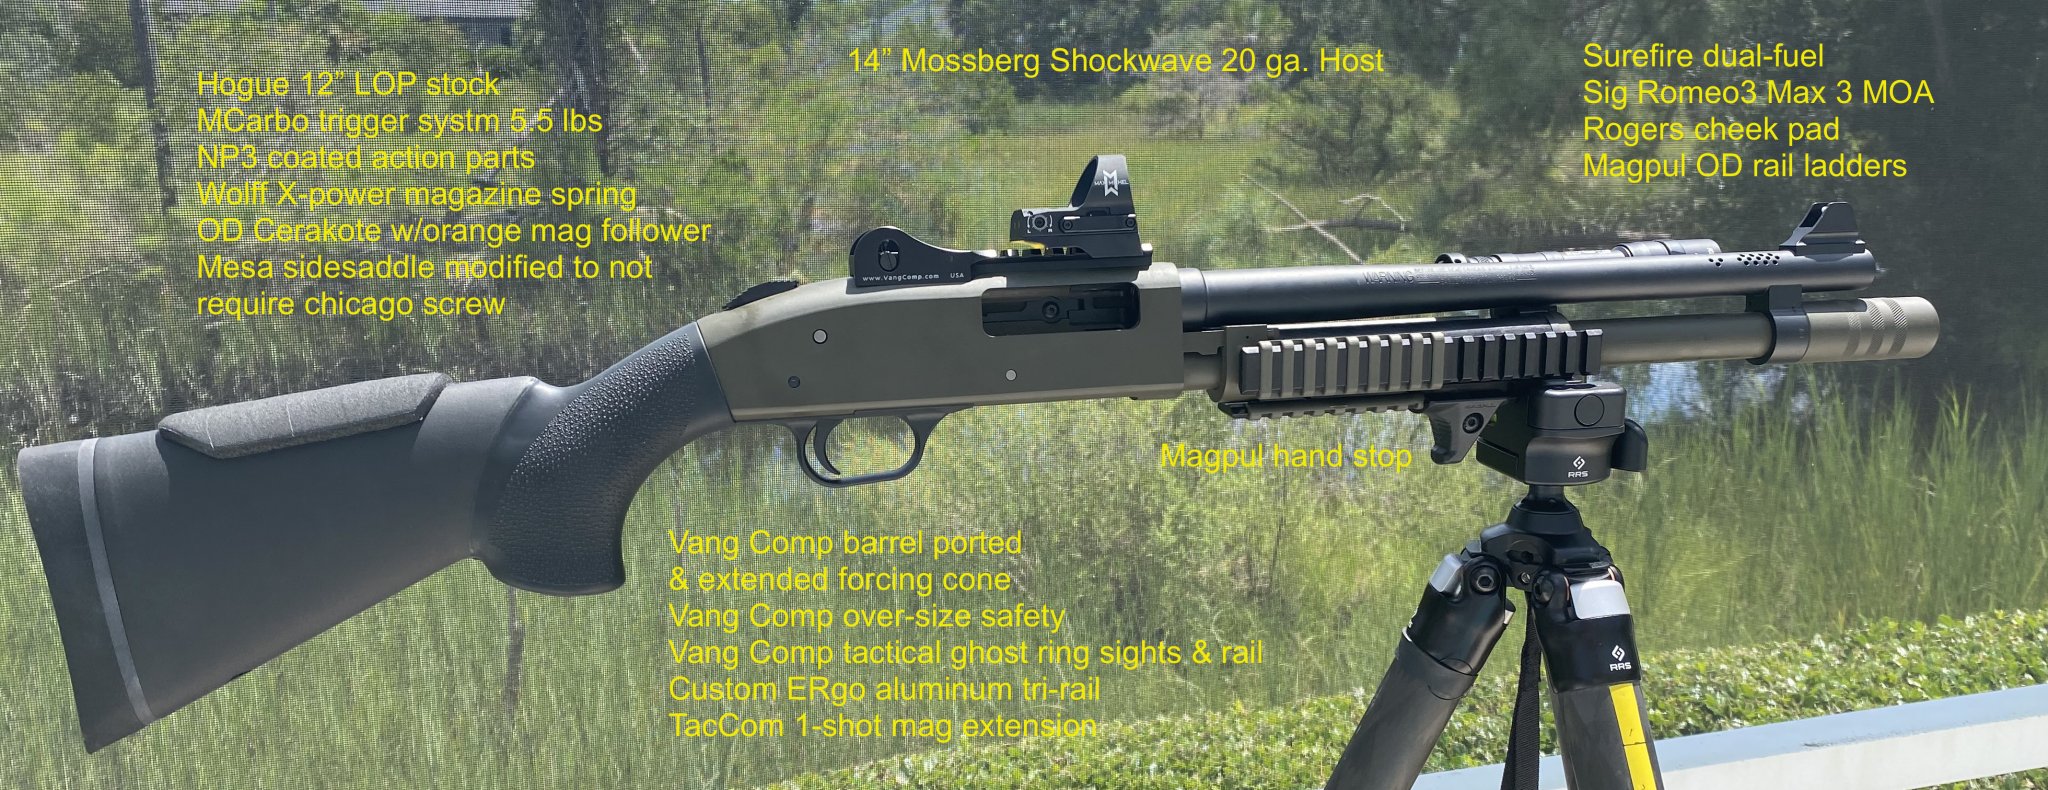 IMG_0499MOSSBERG 590 SHOCKWAVE ROMEO3 MAX RRS TRIPOD POOLSIDE 08.21.21 ANNOTATED copy 3.jpg